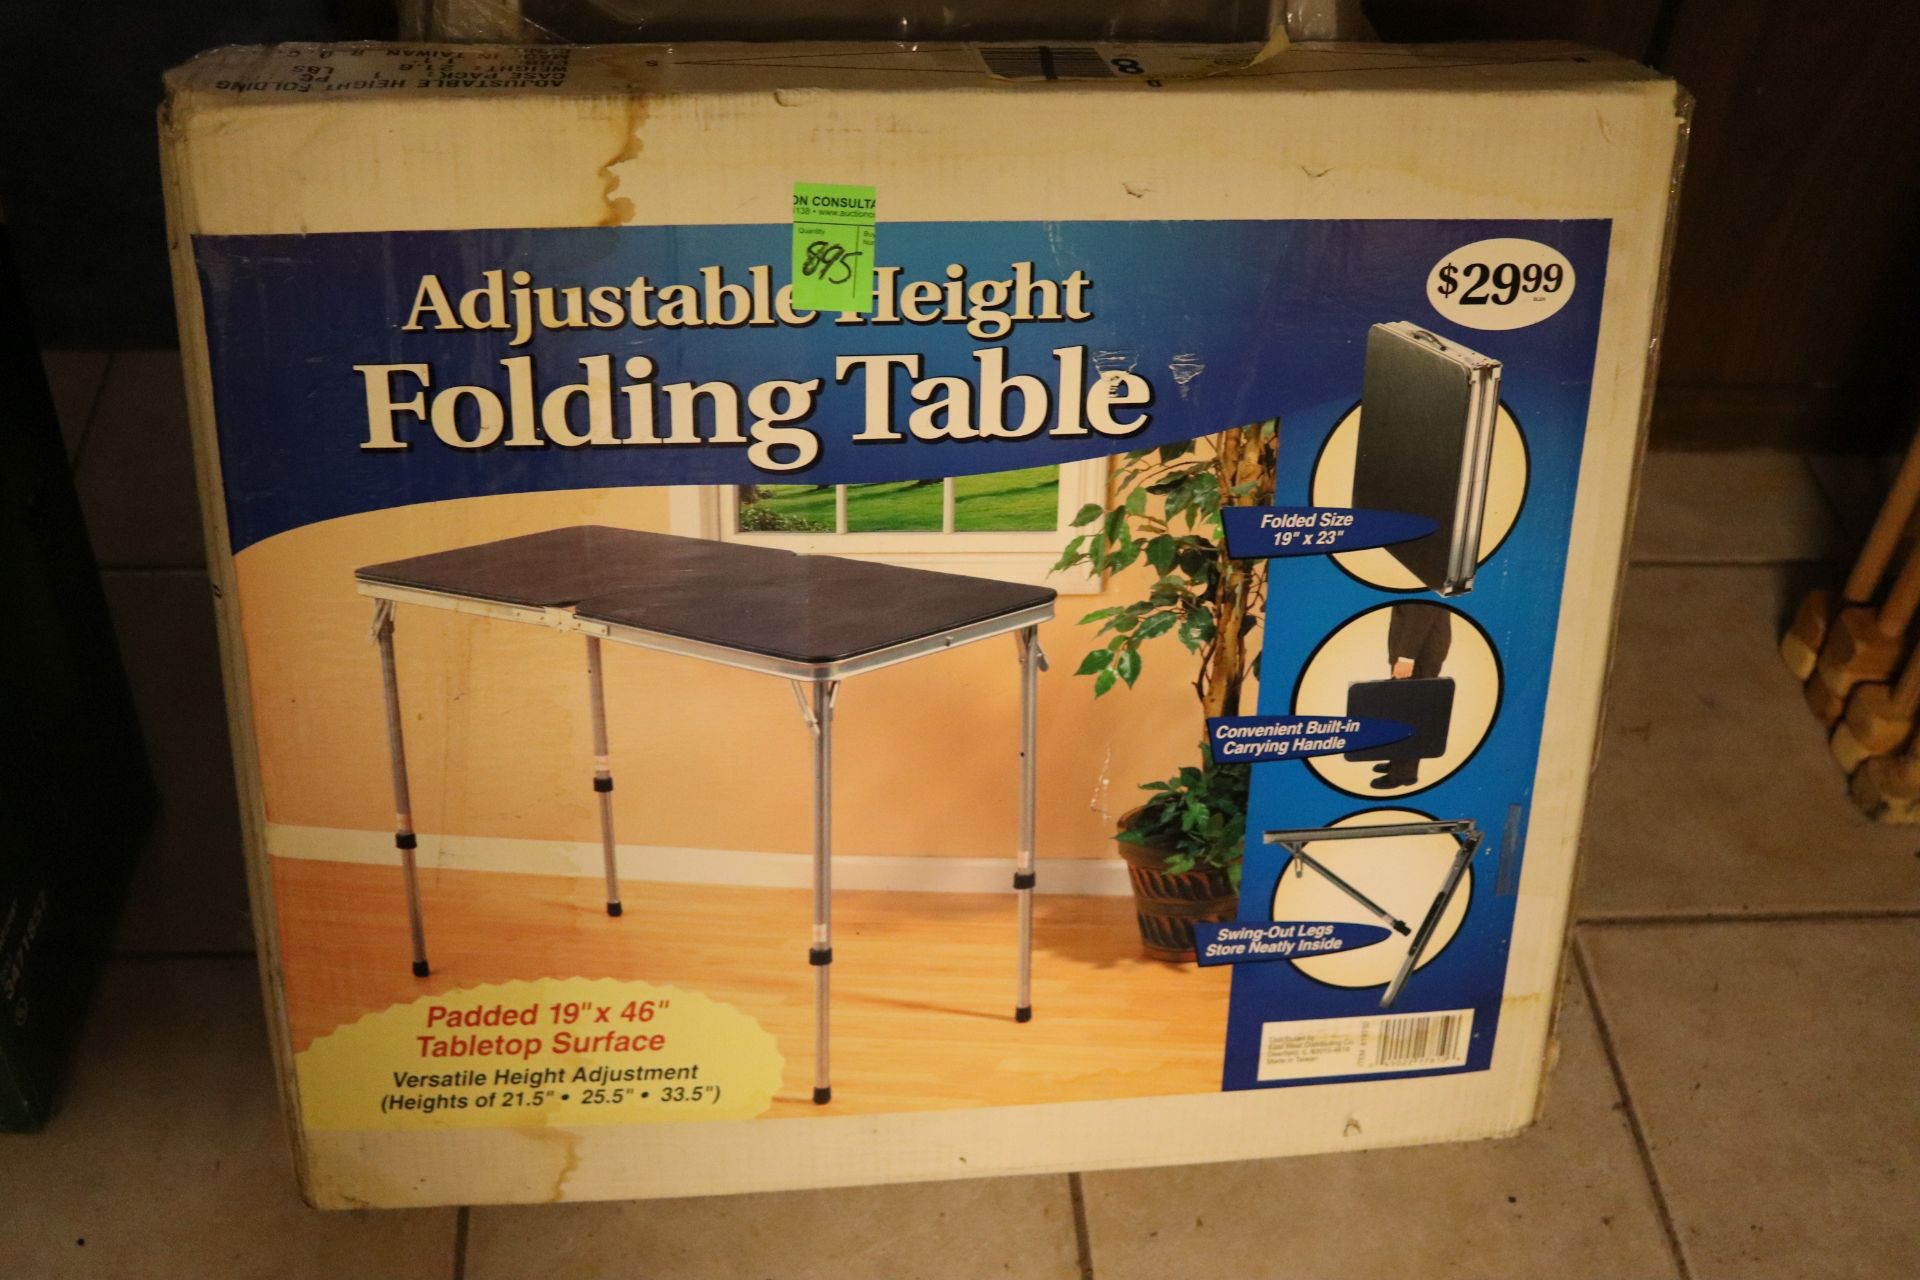 Adjustable height folding table, new in box